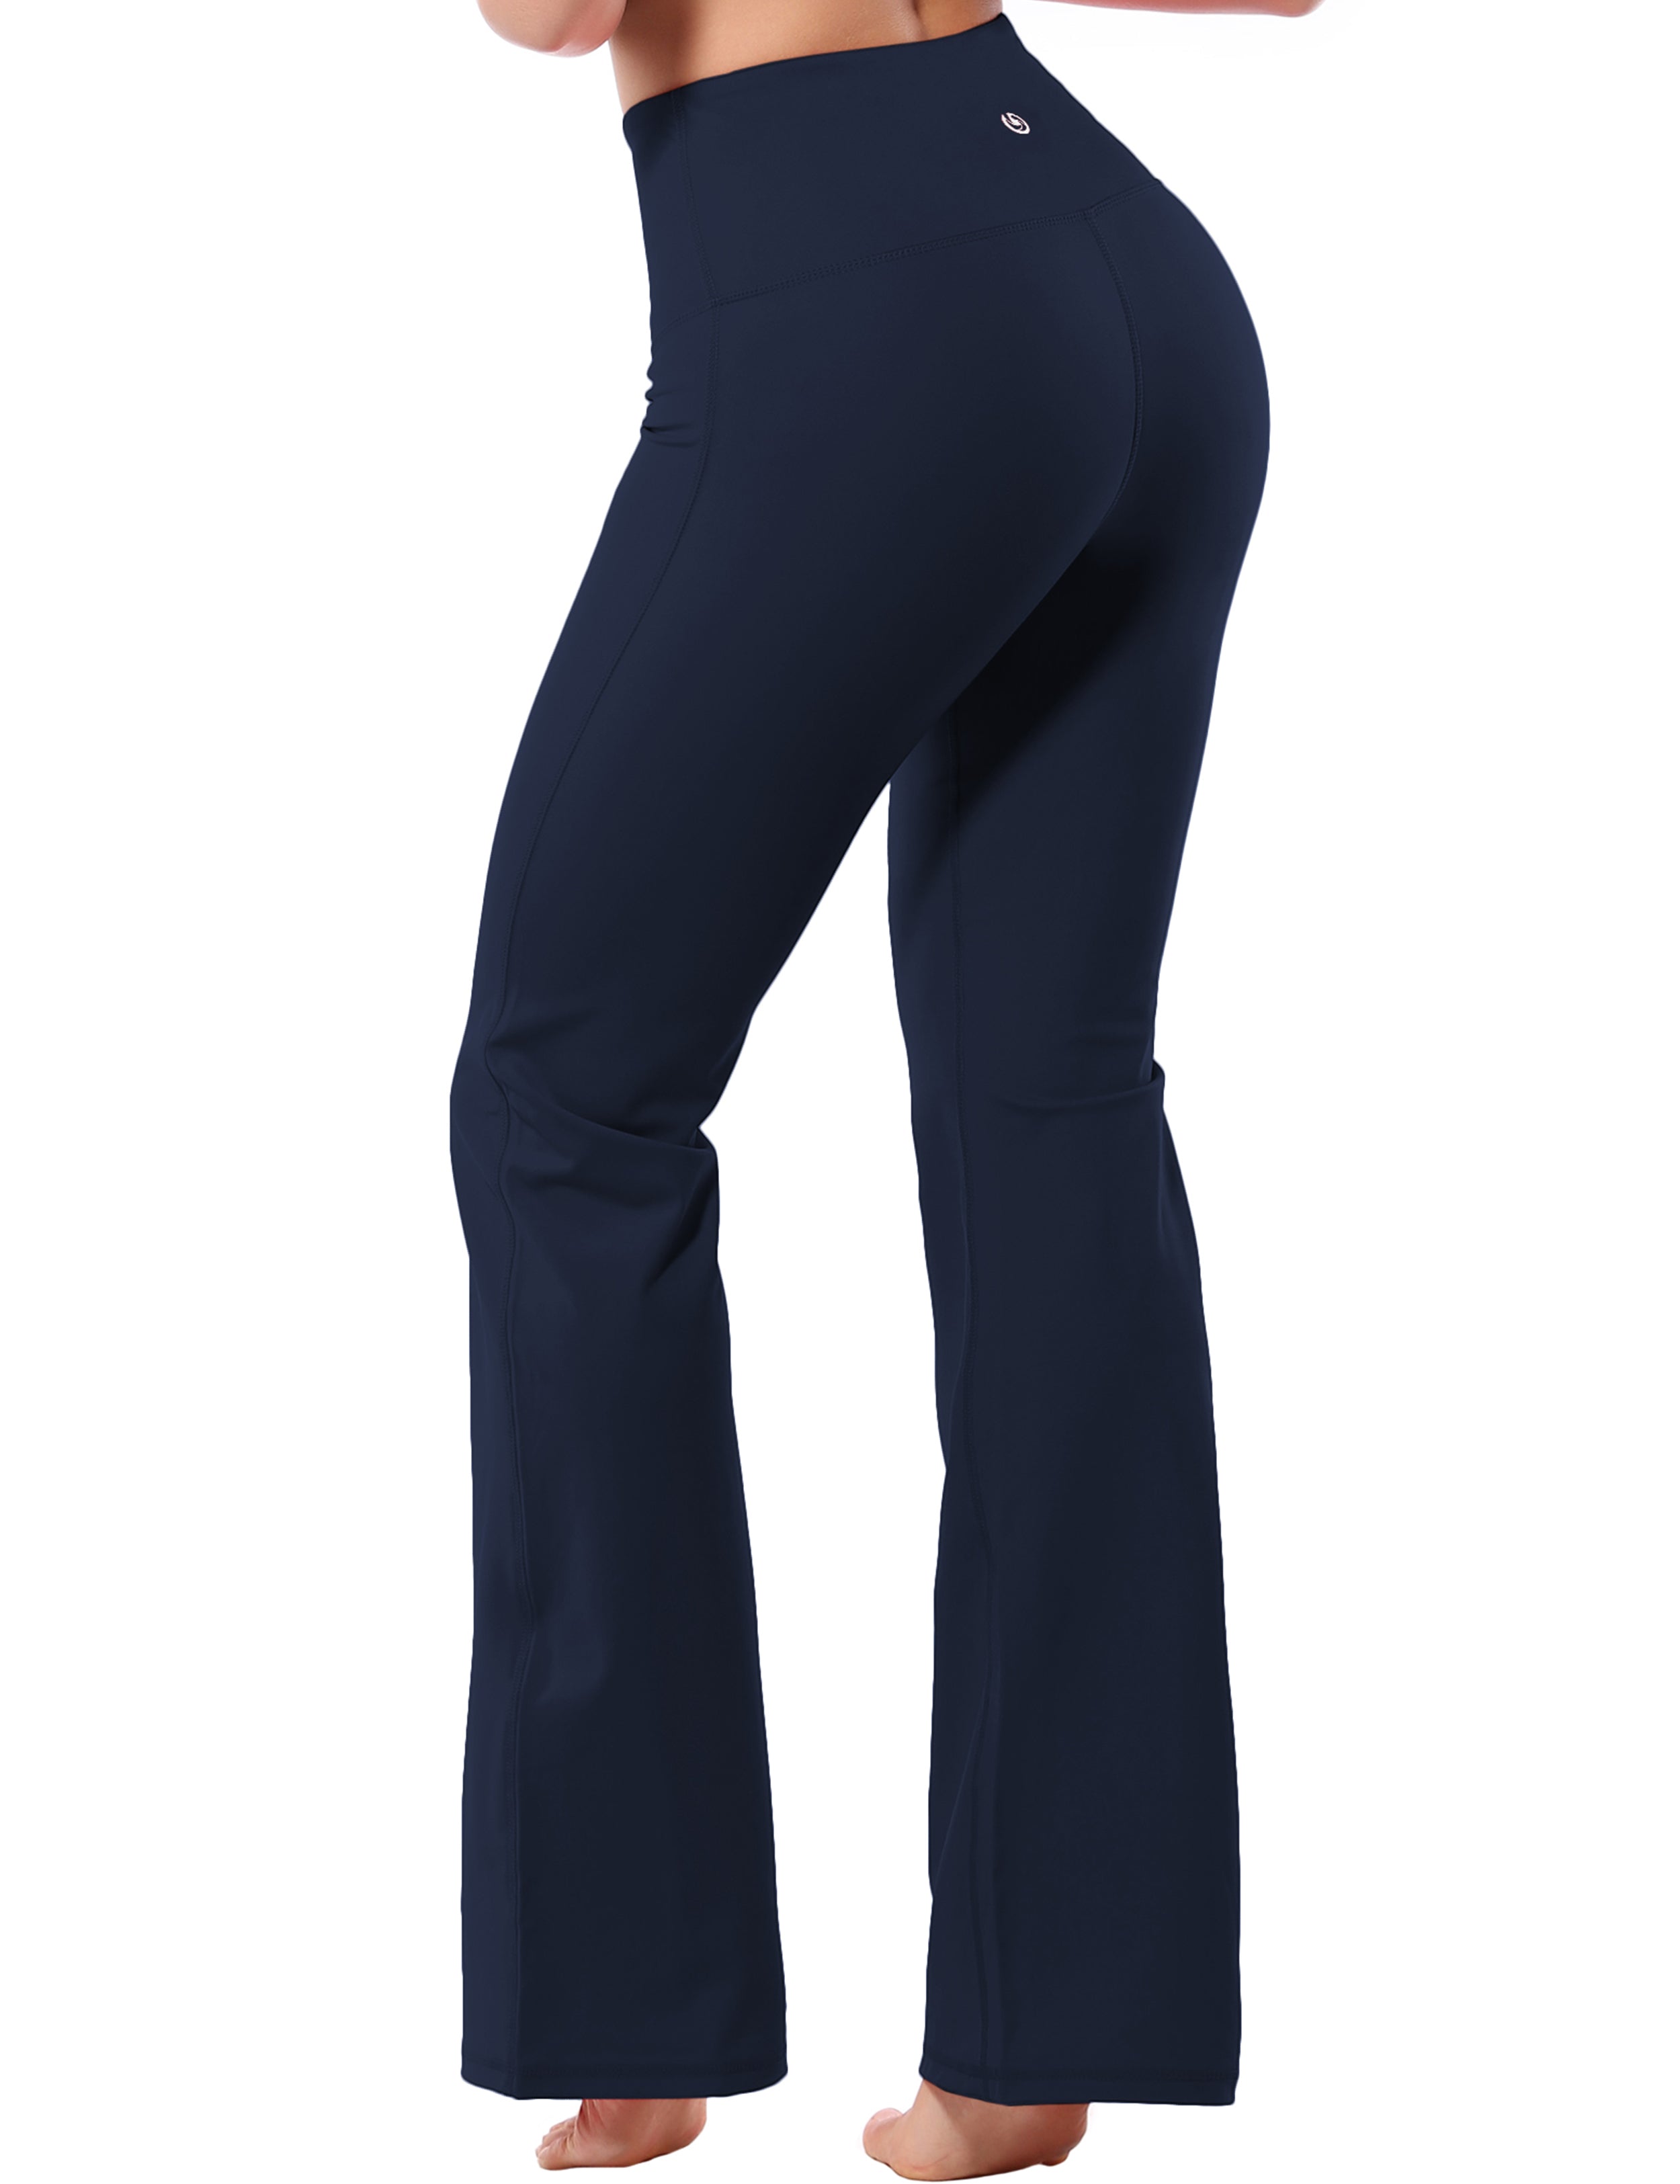 High Waist Bootcut Leggings Darknavy 75%Nylon/25%Spandex Fabric doesn't attract lint easily 4-way stretch No see-through Moisture-wicking Tummy control Inner pocket Five lengths